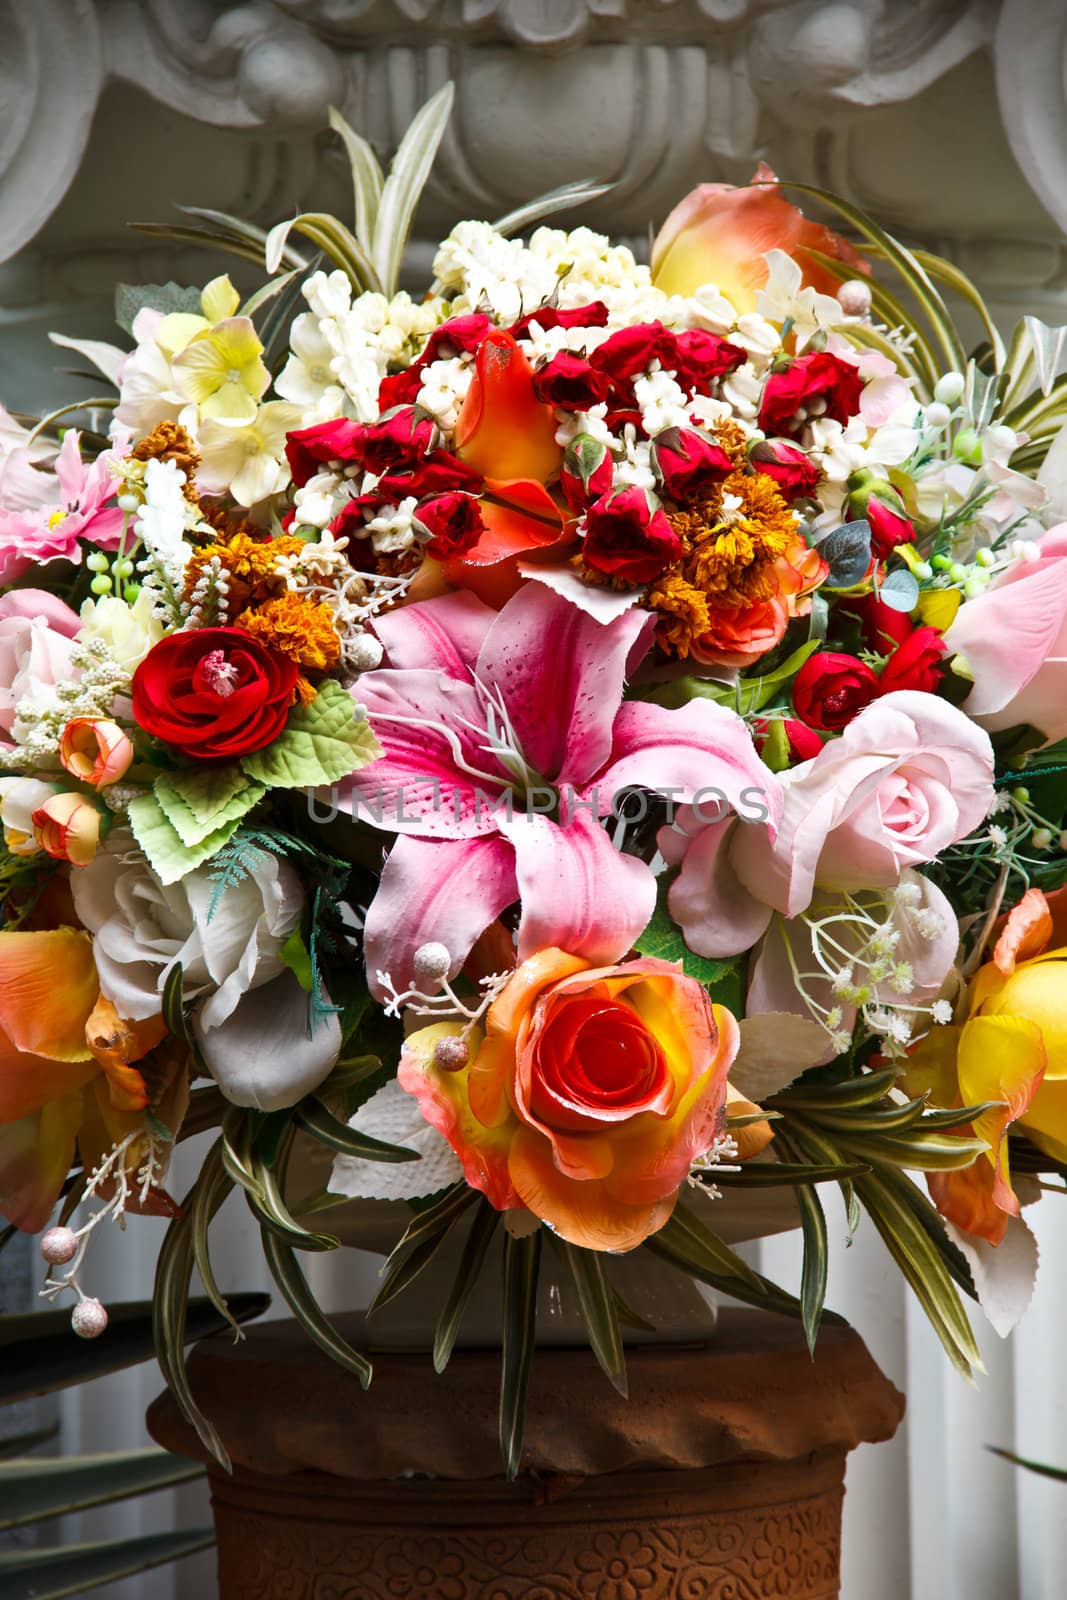 Bouquet of colorful flowers in the vase on the altar